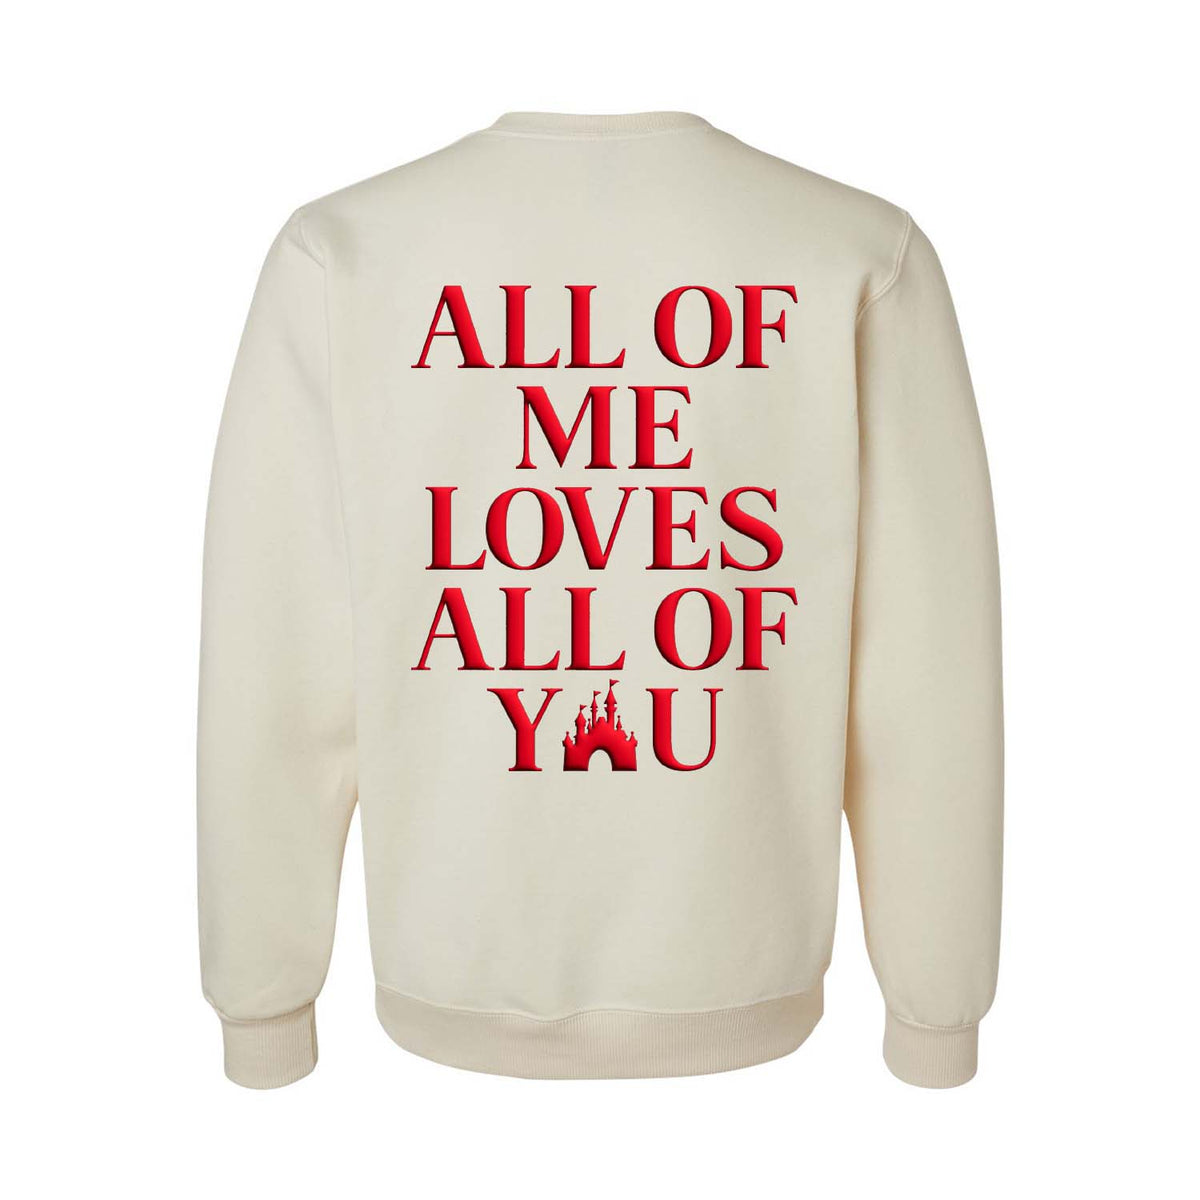 All of Me Loves All of You Puffed Sweatshirt